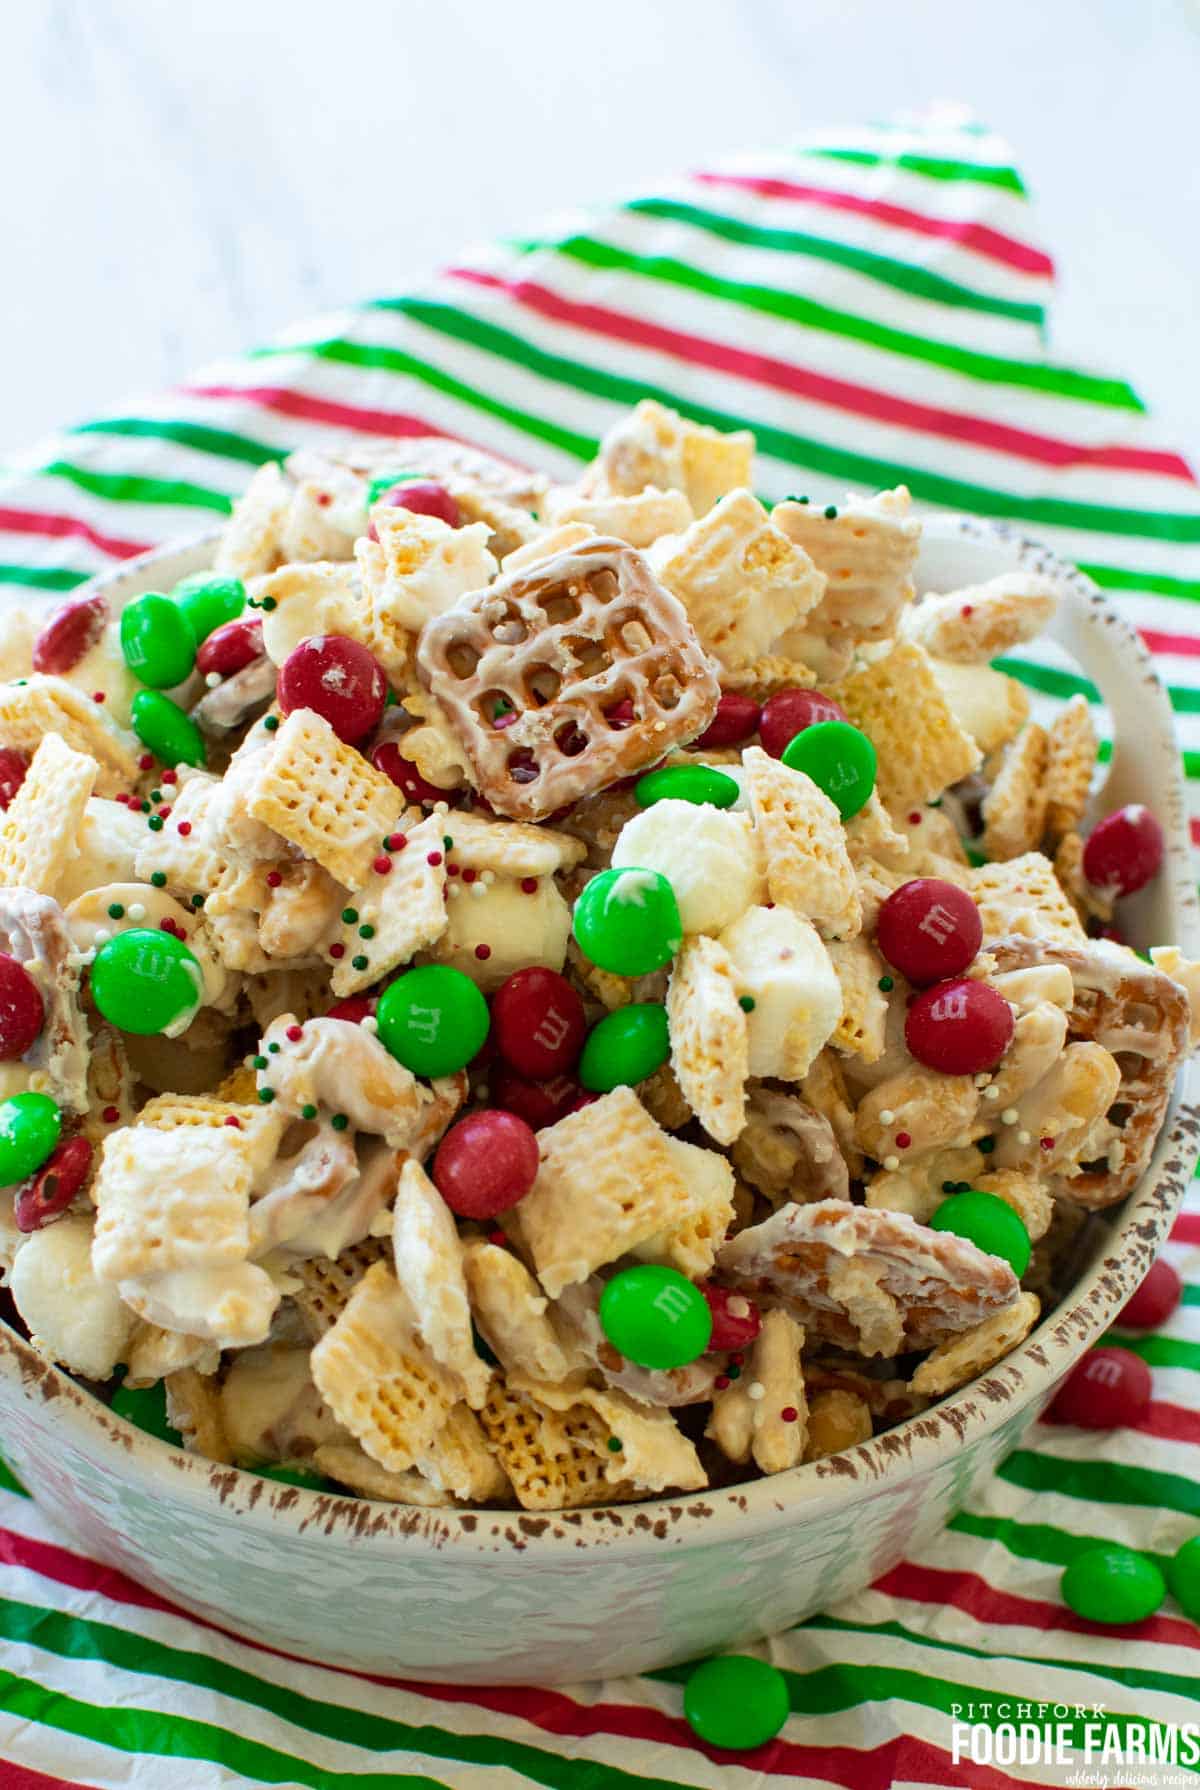 Snack mix made with Chex cereal, pretzels, and M&Ms coated in white chocolate in a bowl.